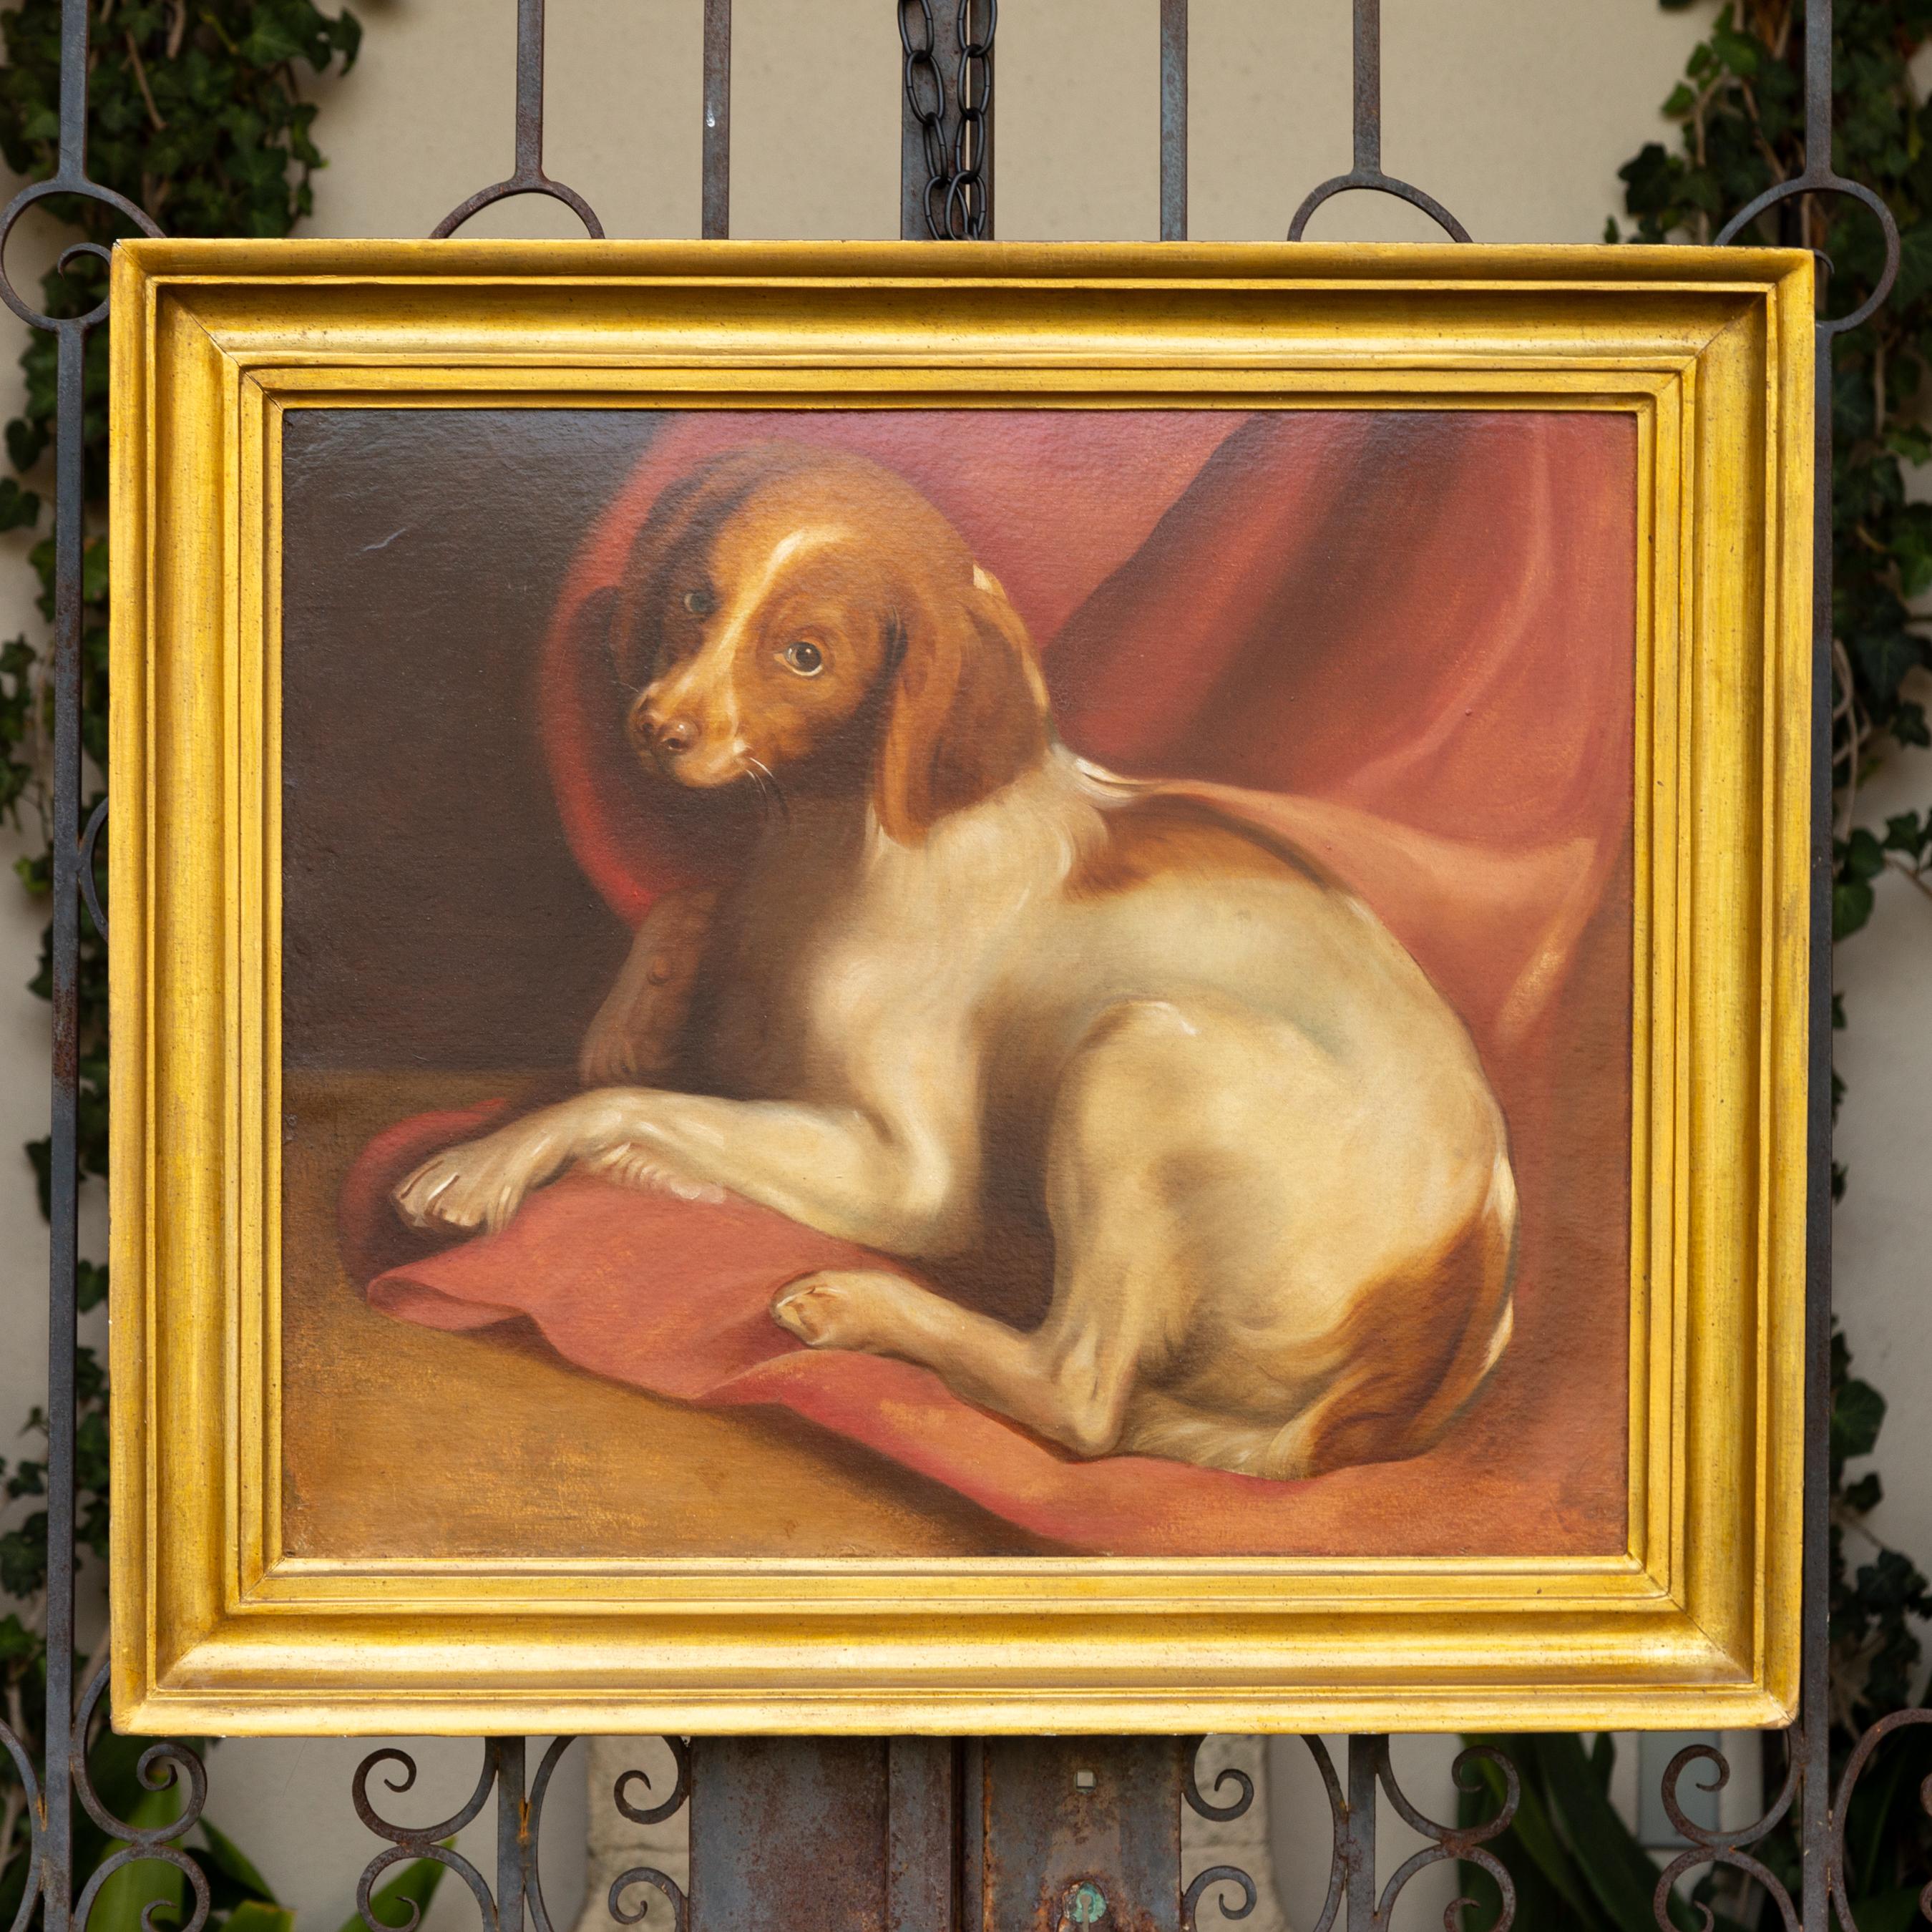 19th Century American 1890s Framed Oil on Board Painting Depicting a Dog Lying on a Red Drape For Sale